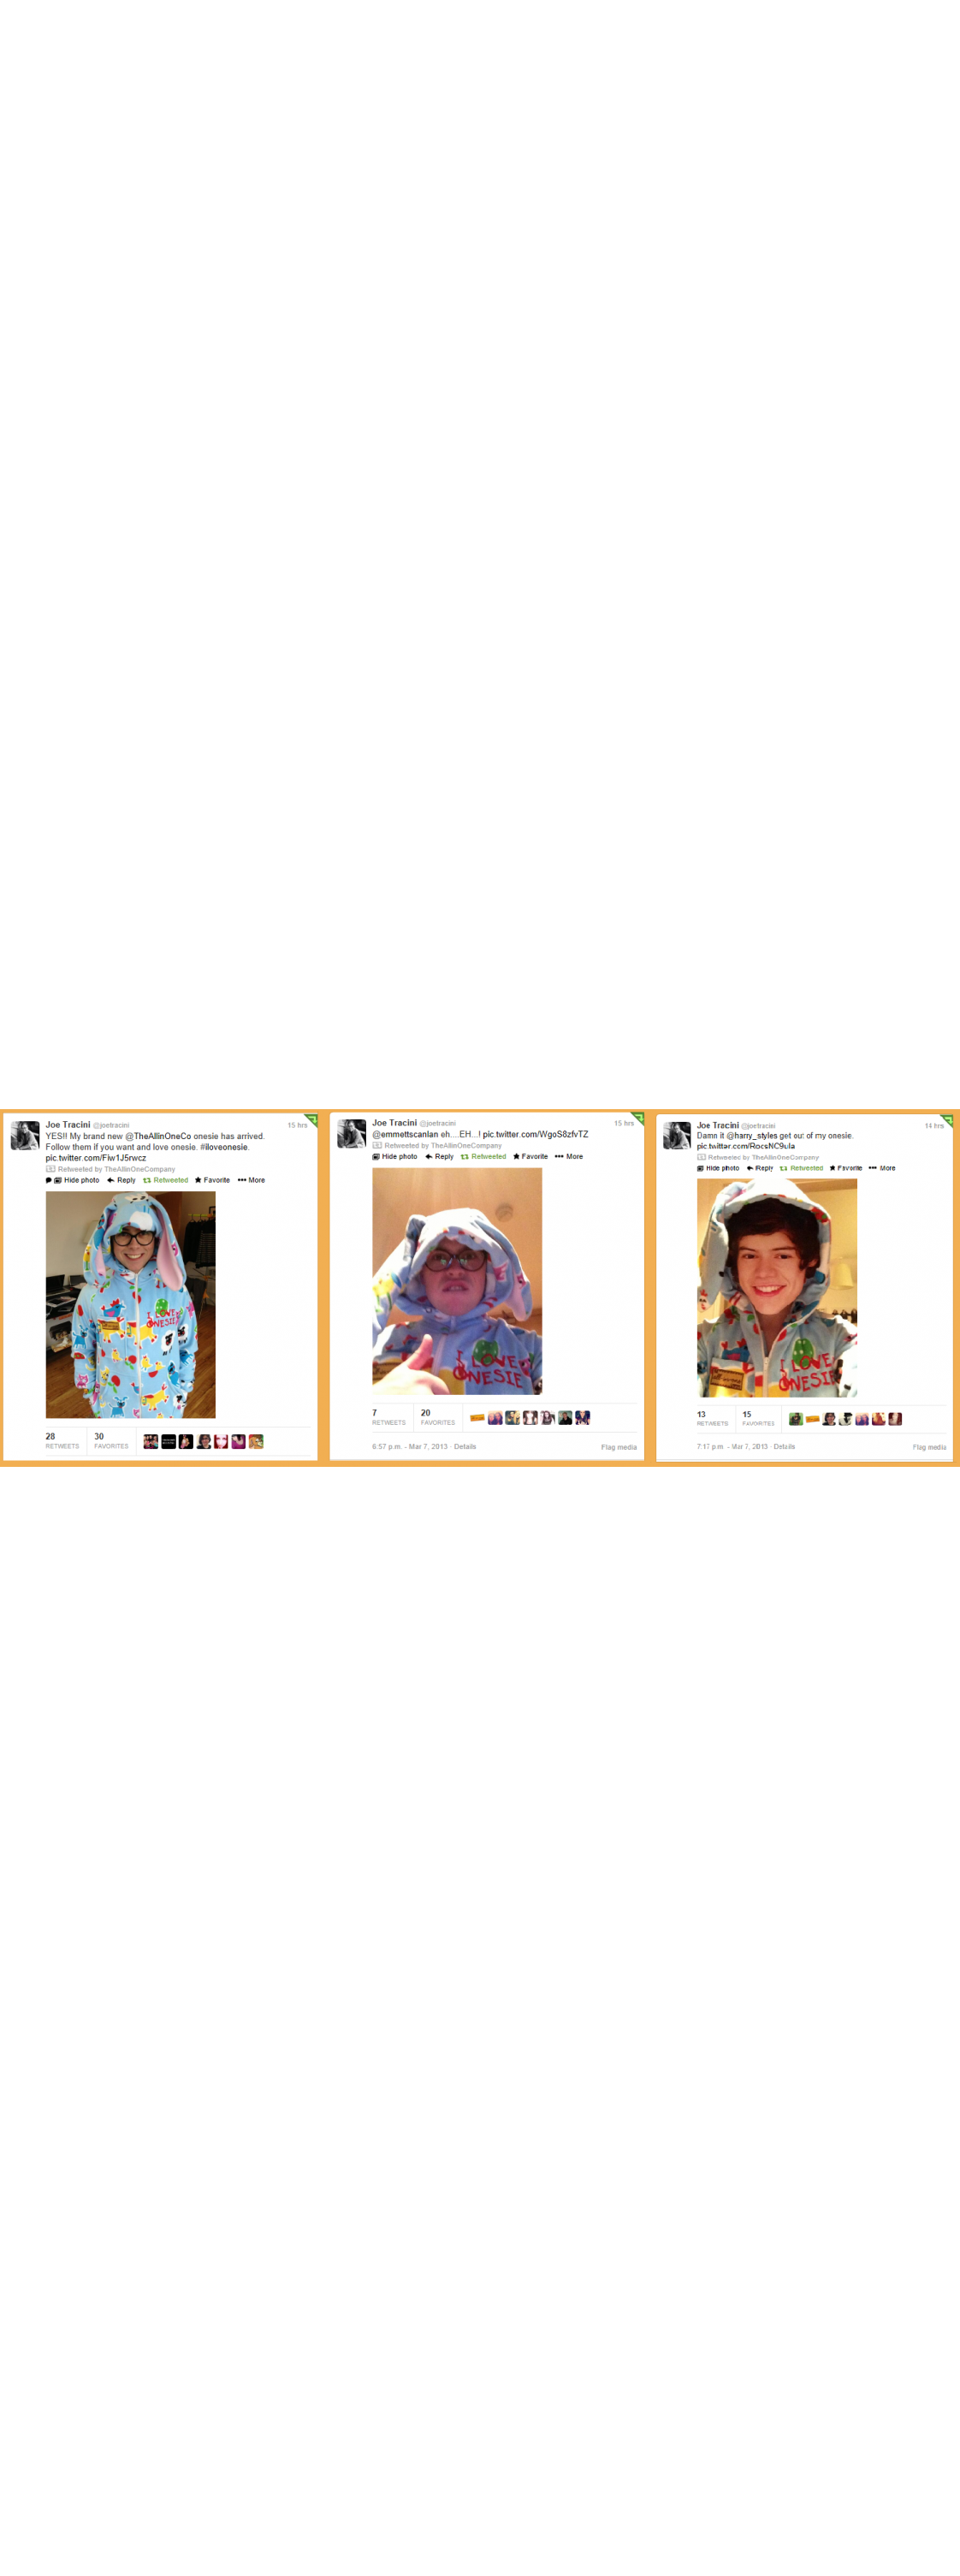 Joe Tracini tweets his Onesie to The All-in-One Company, Emmett Scanlan and Harry Styles